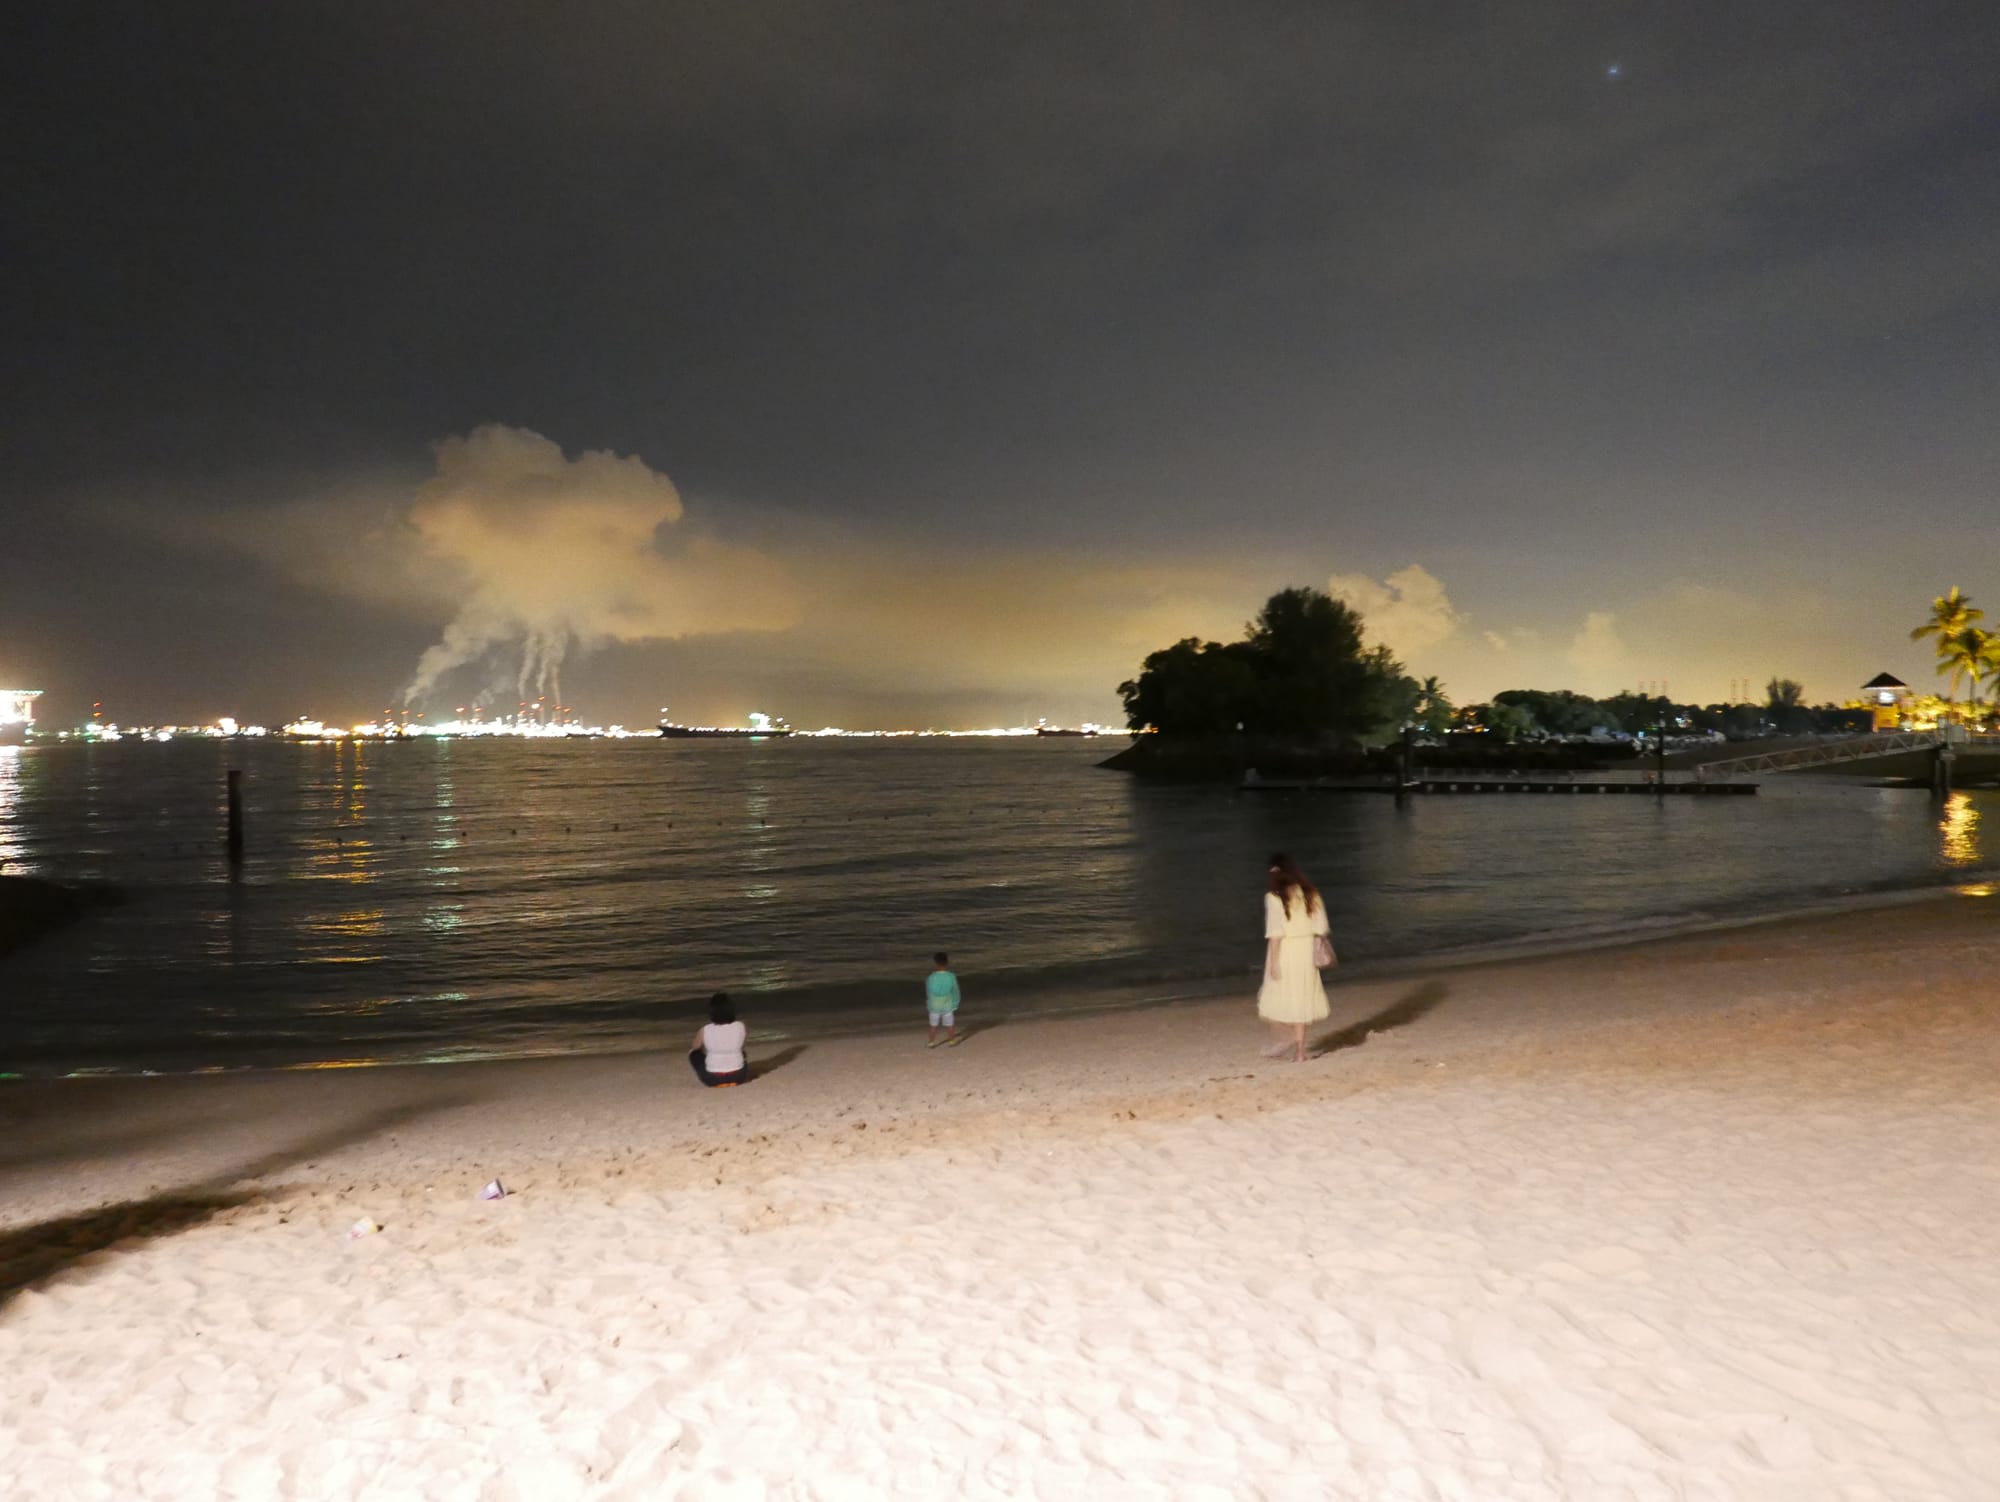 Photo by Author — industrial complexes viewed from Siloso Beach, Singapore, at night